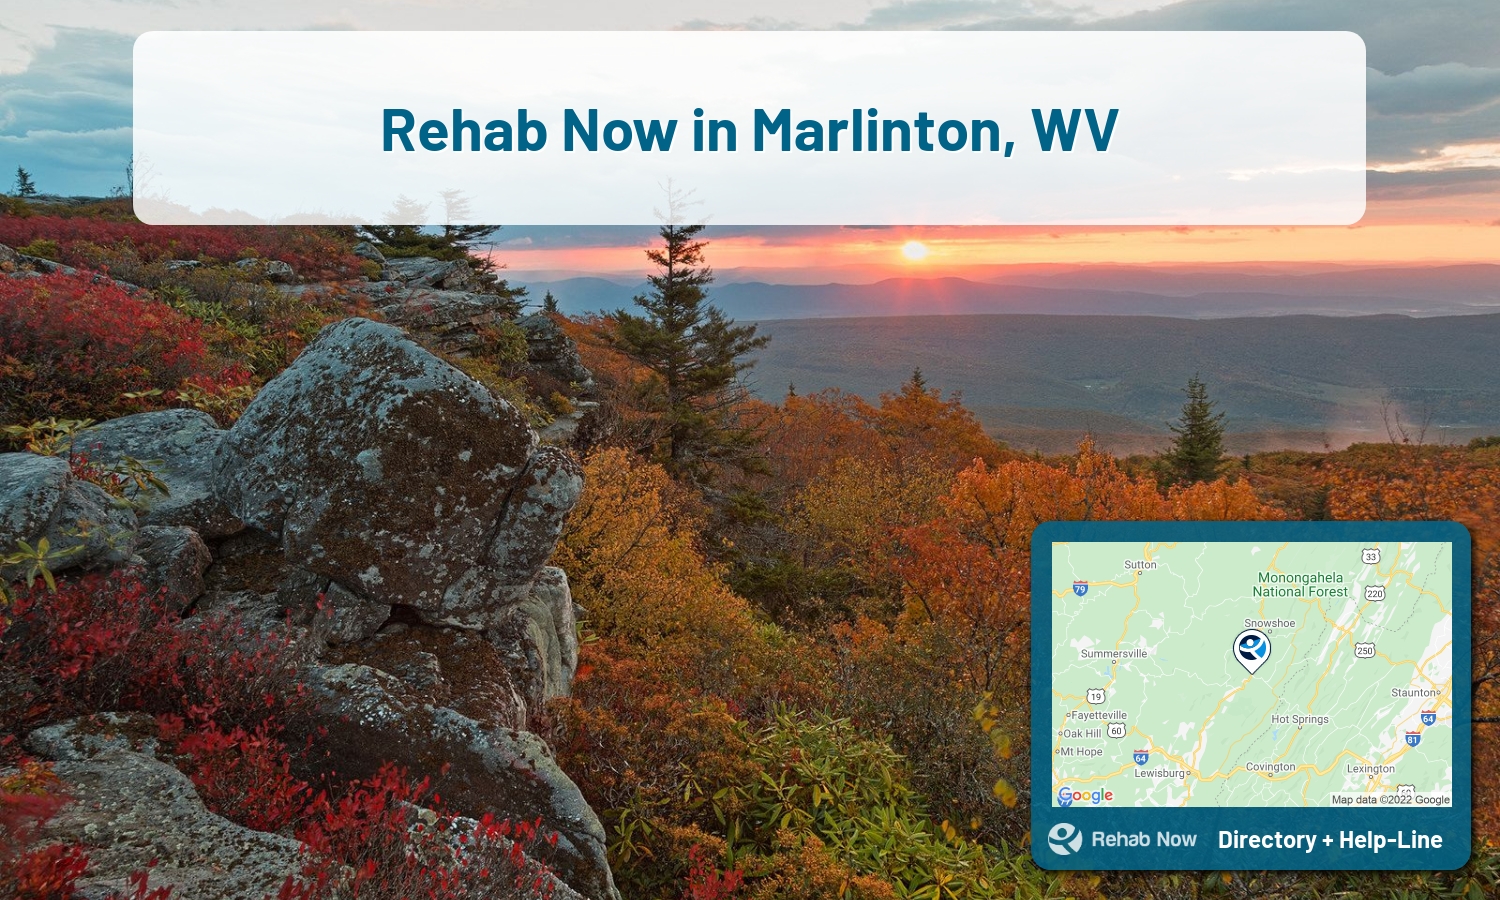 Marlinton, WV Treatment Centers. Find drug rehab in Marlinton, West Virginia, or detox and treatment programs. Get the right help now!